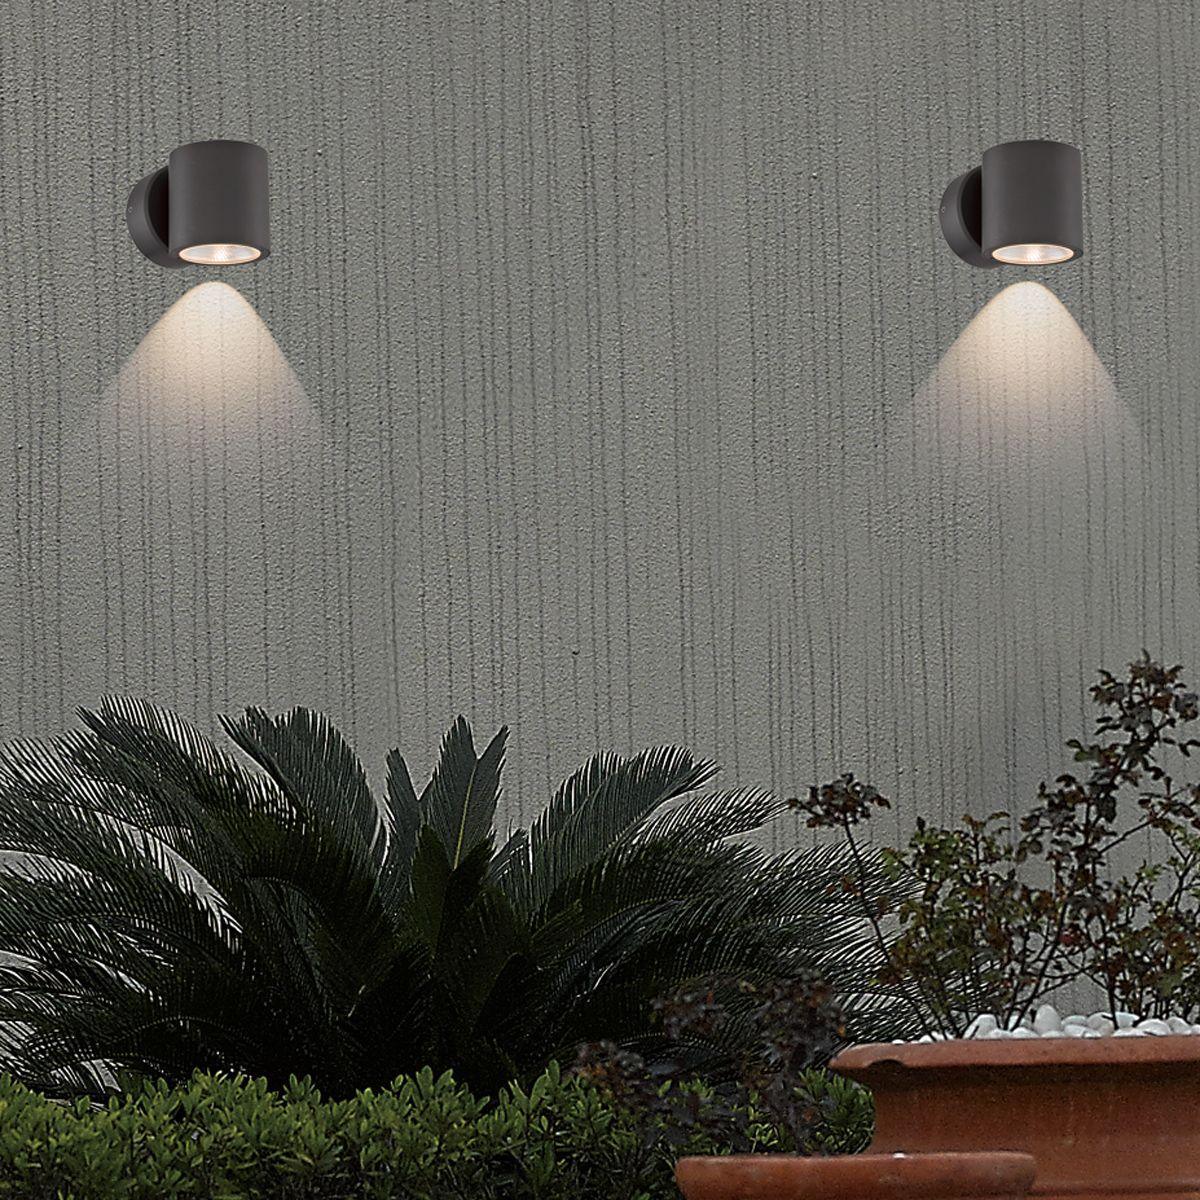 Volume 4 In 1 Light LED Outdoor Cylinder Wall Light 3000K Gray Finish - Bees Lighting